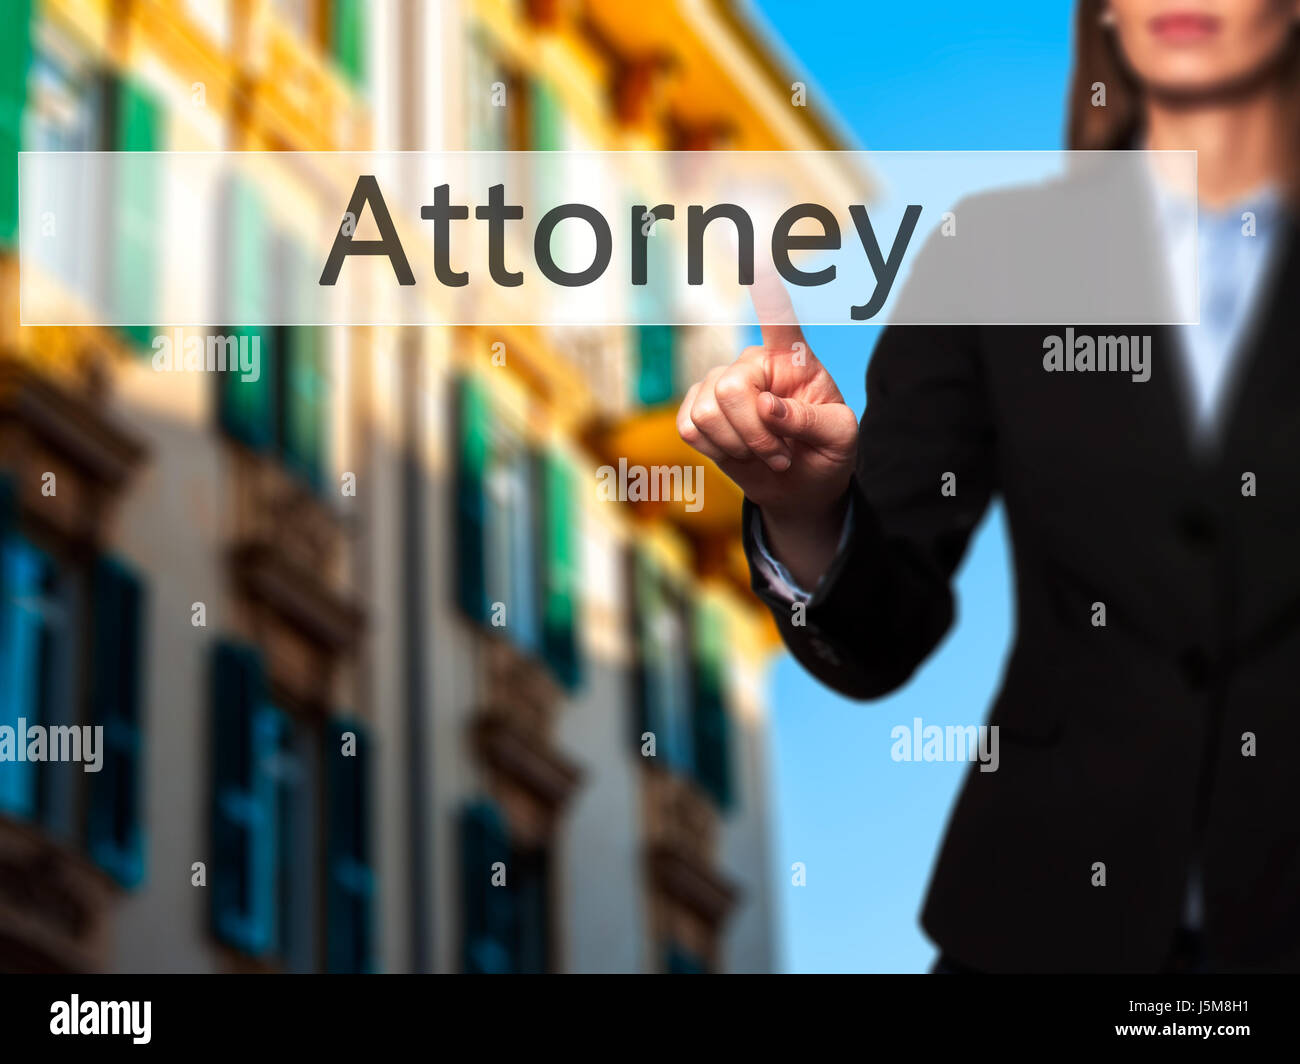 Attorney - Businesswoman hand pressing button on touch screen interface. Business, technology, internet concept. Stock Photo Stock Photo